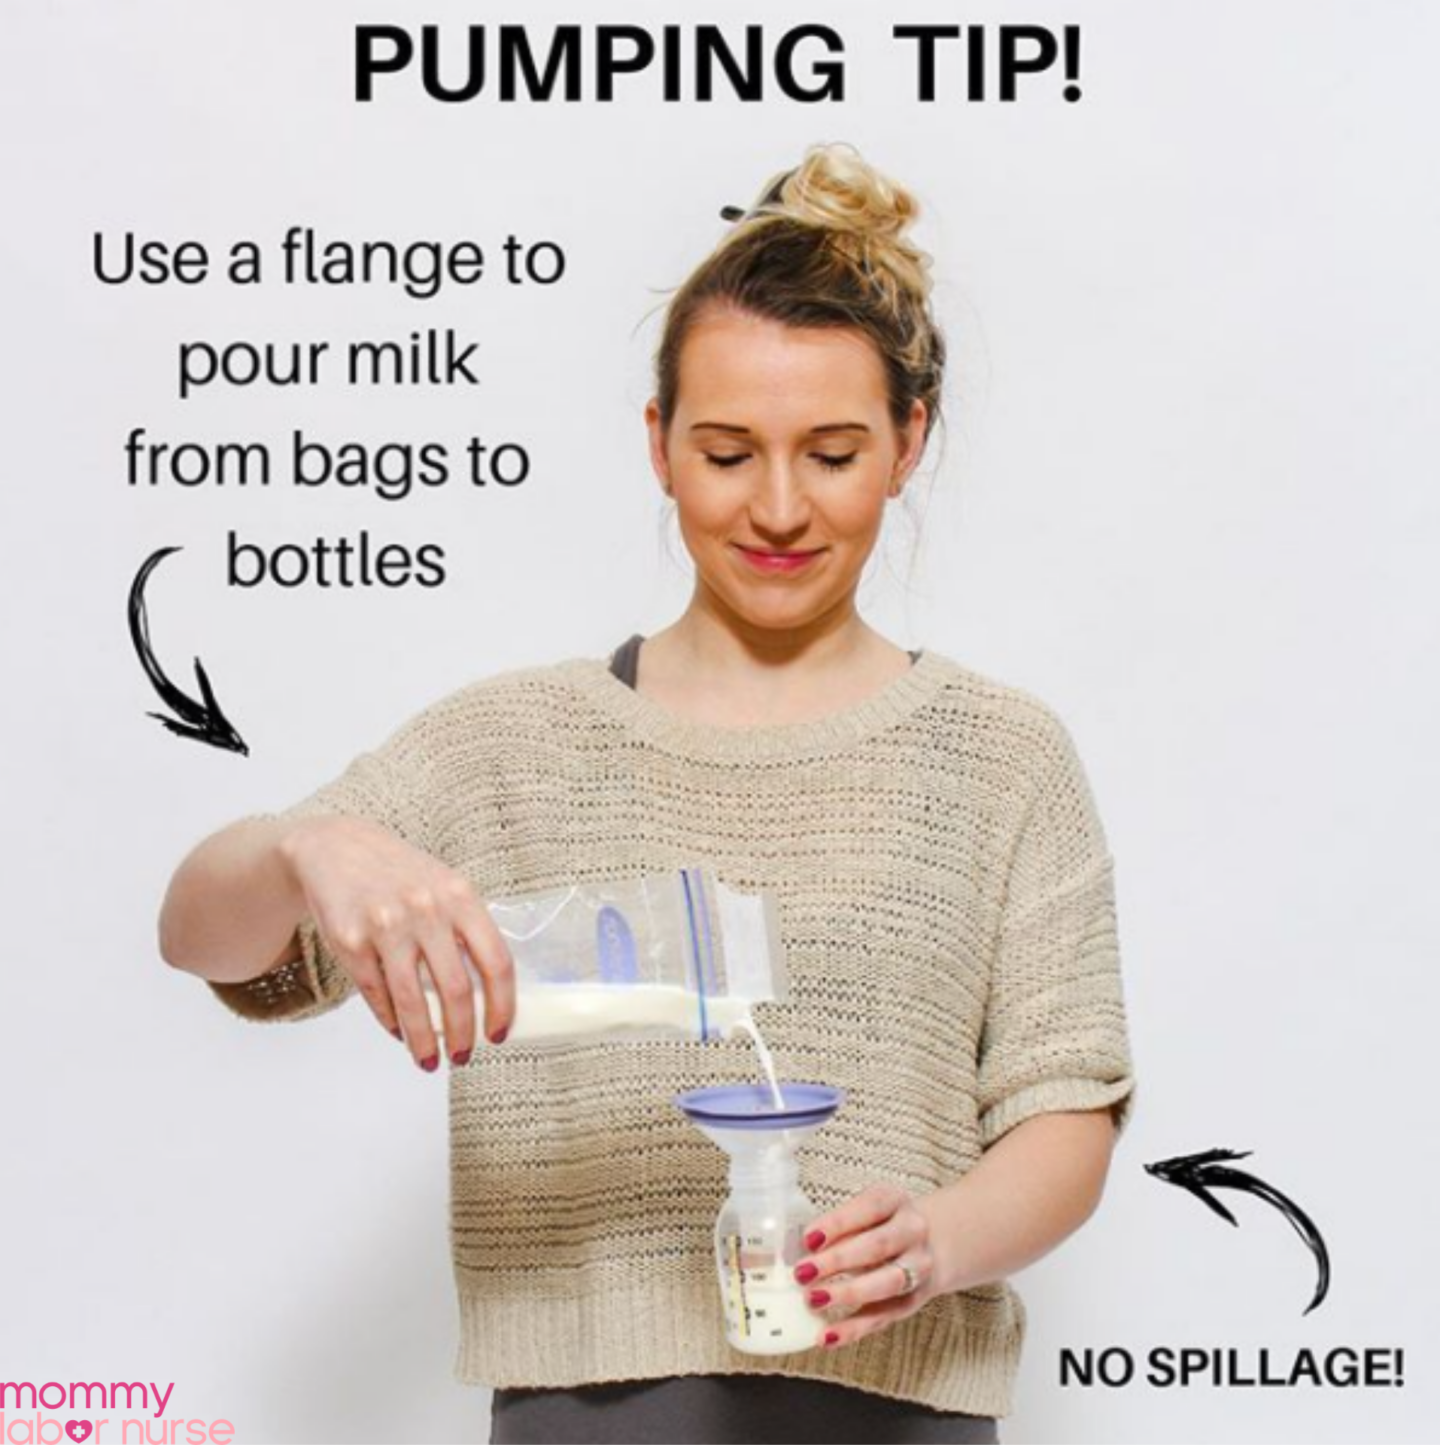 breast pumping tip infographic